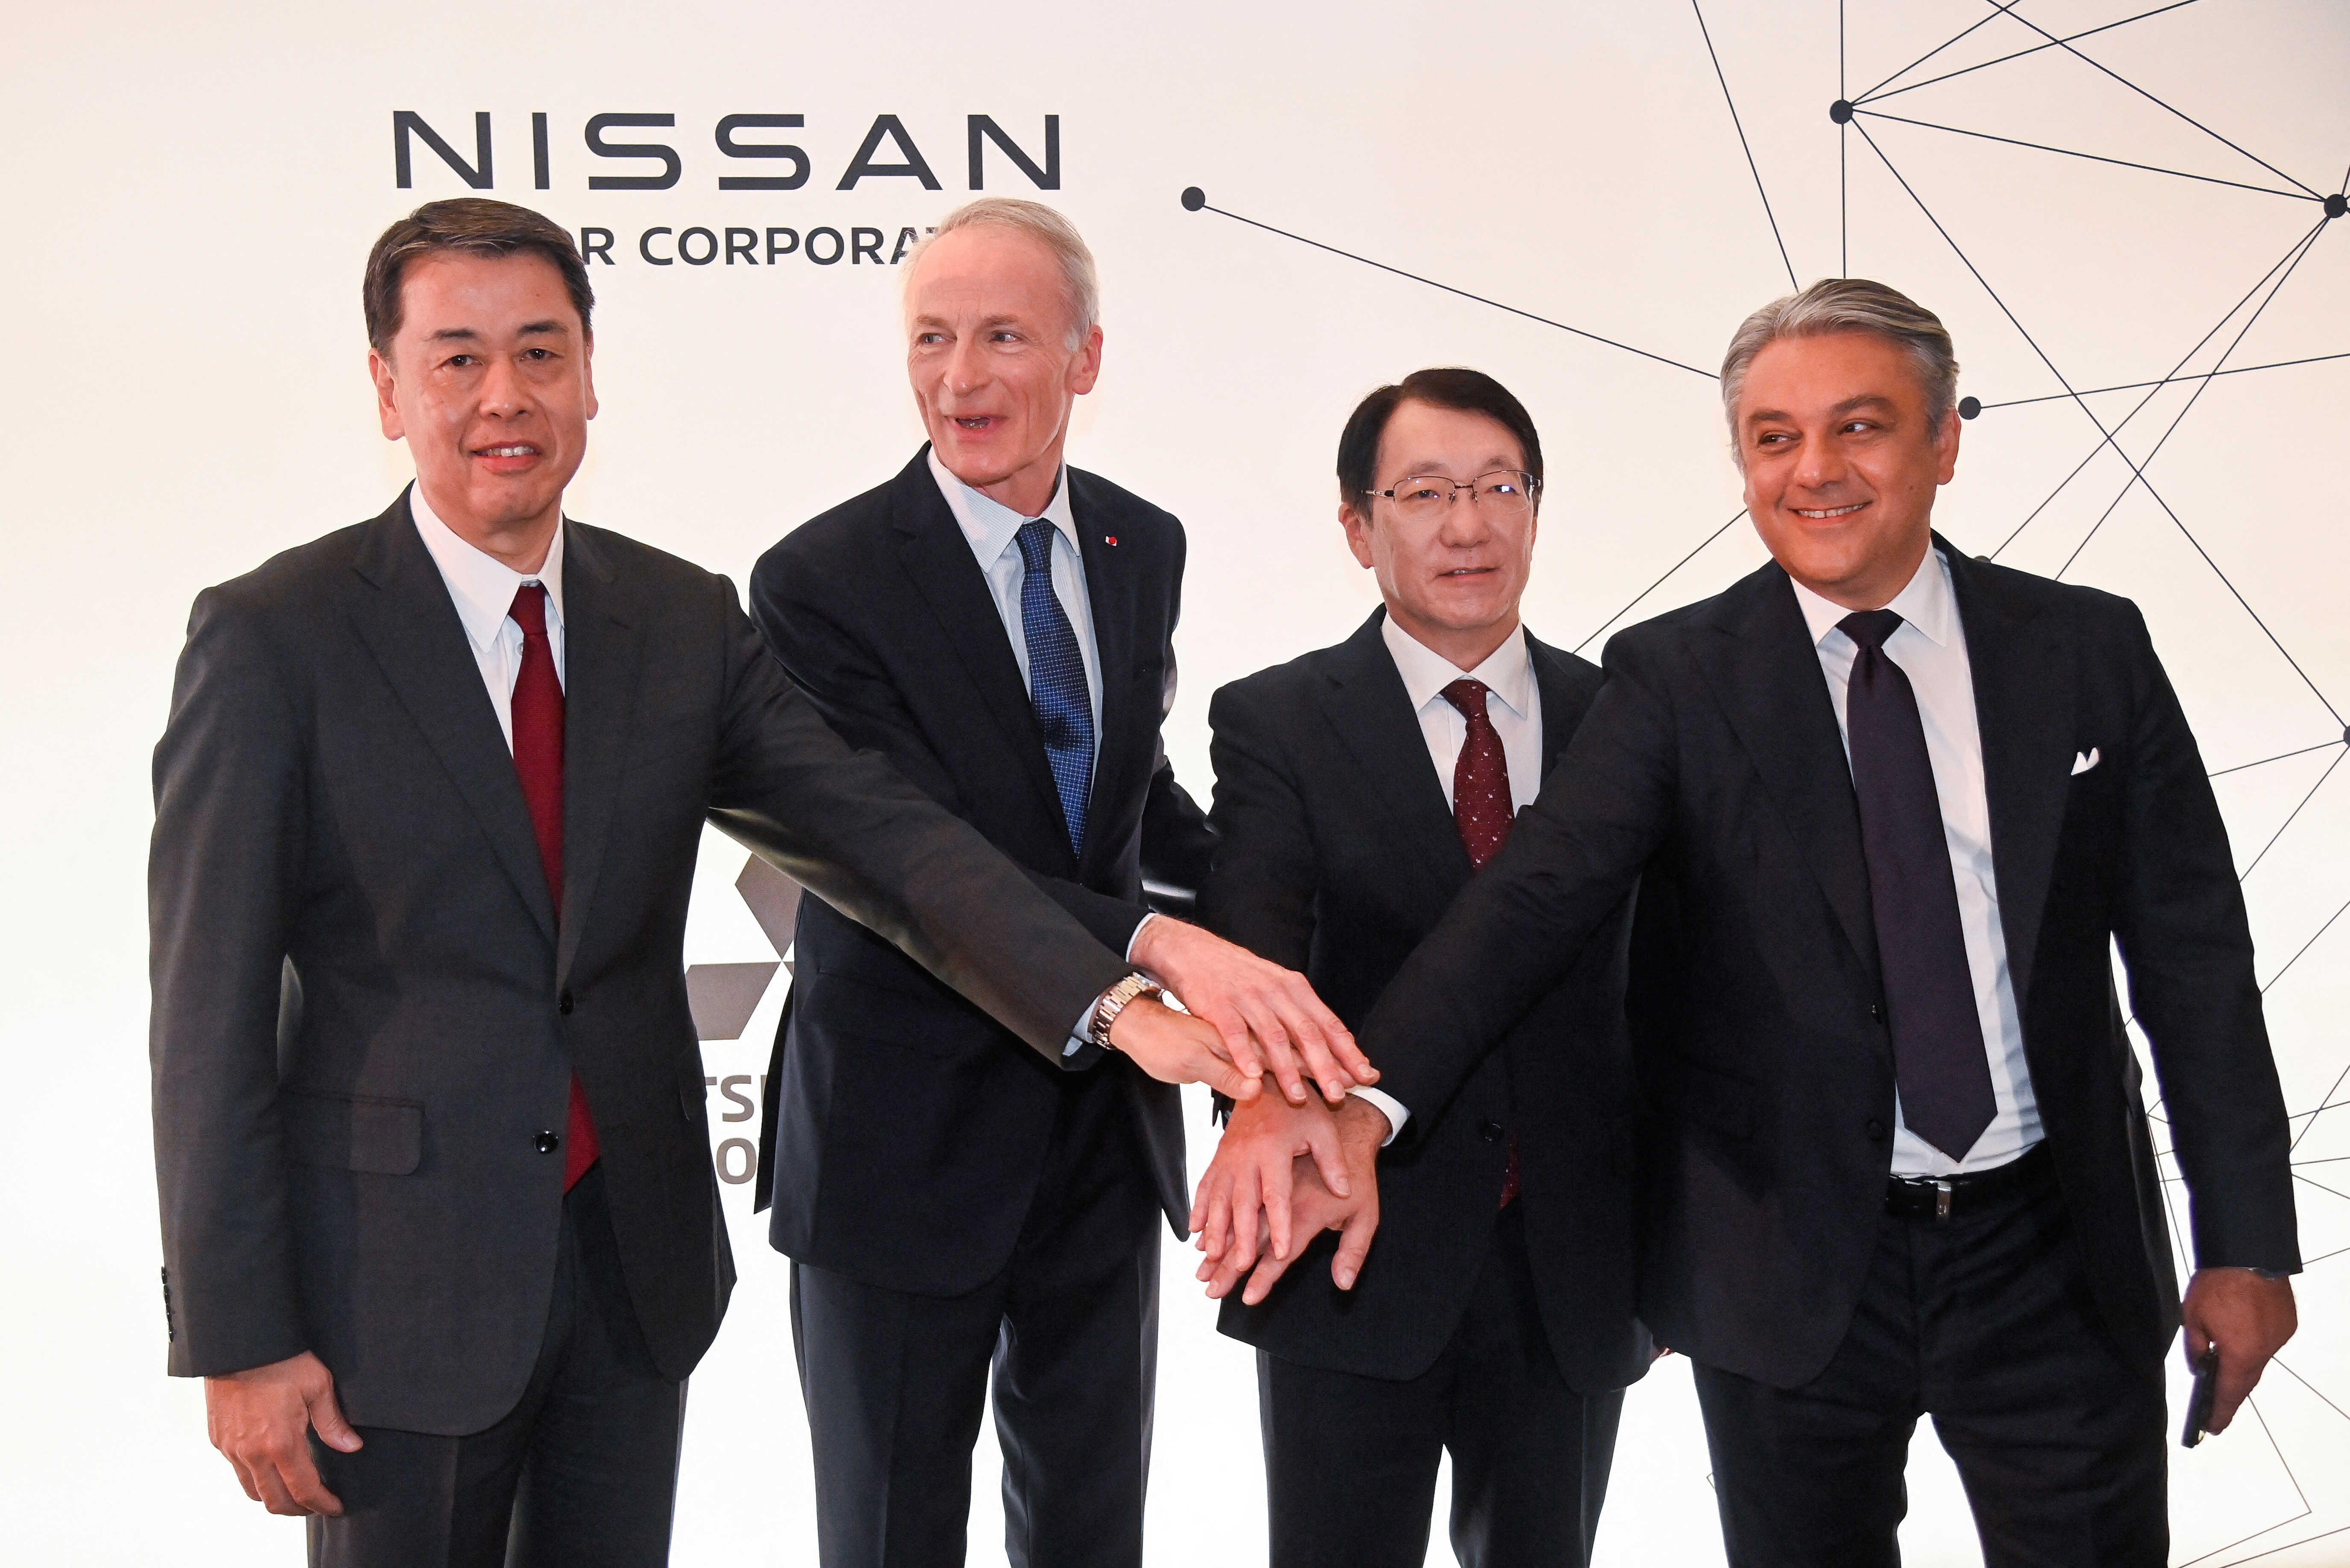 Nissan and Renault unveil agreement to reboot 24-year old alliance in London